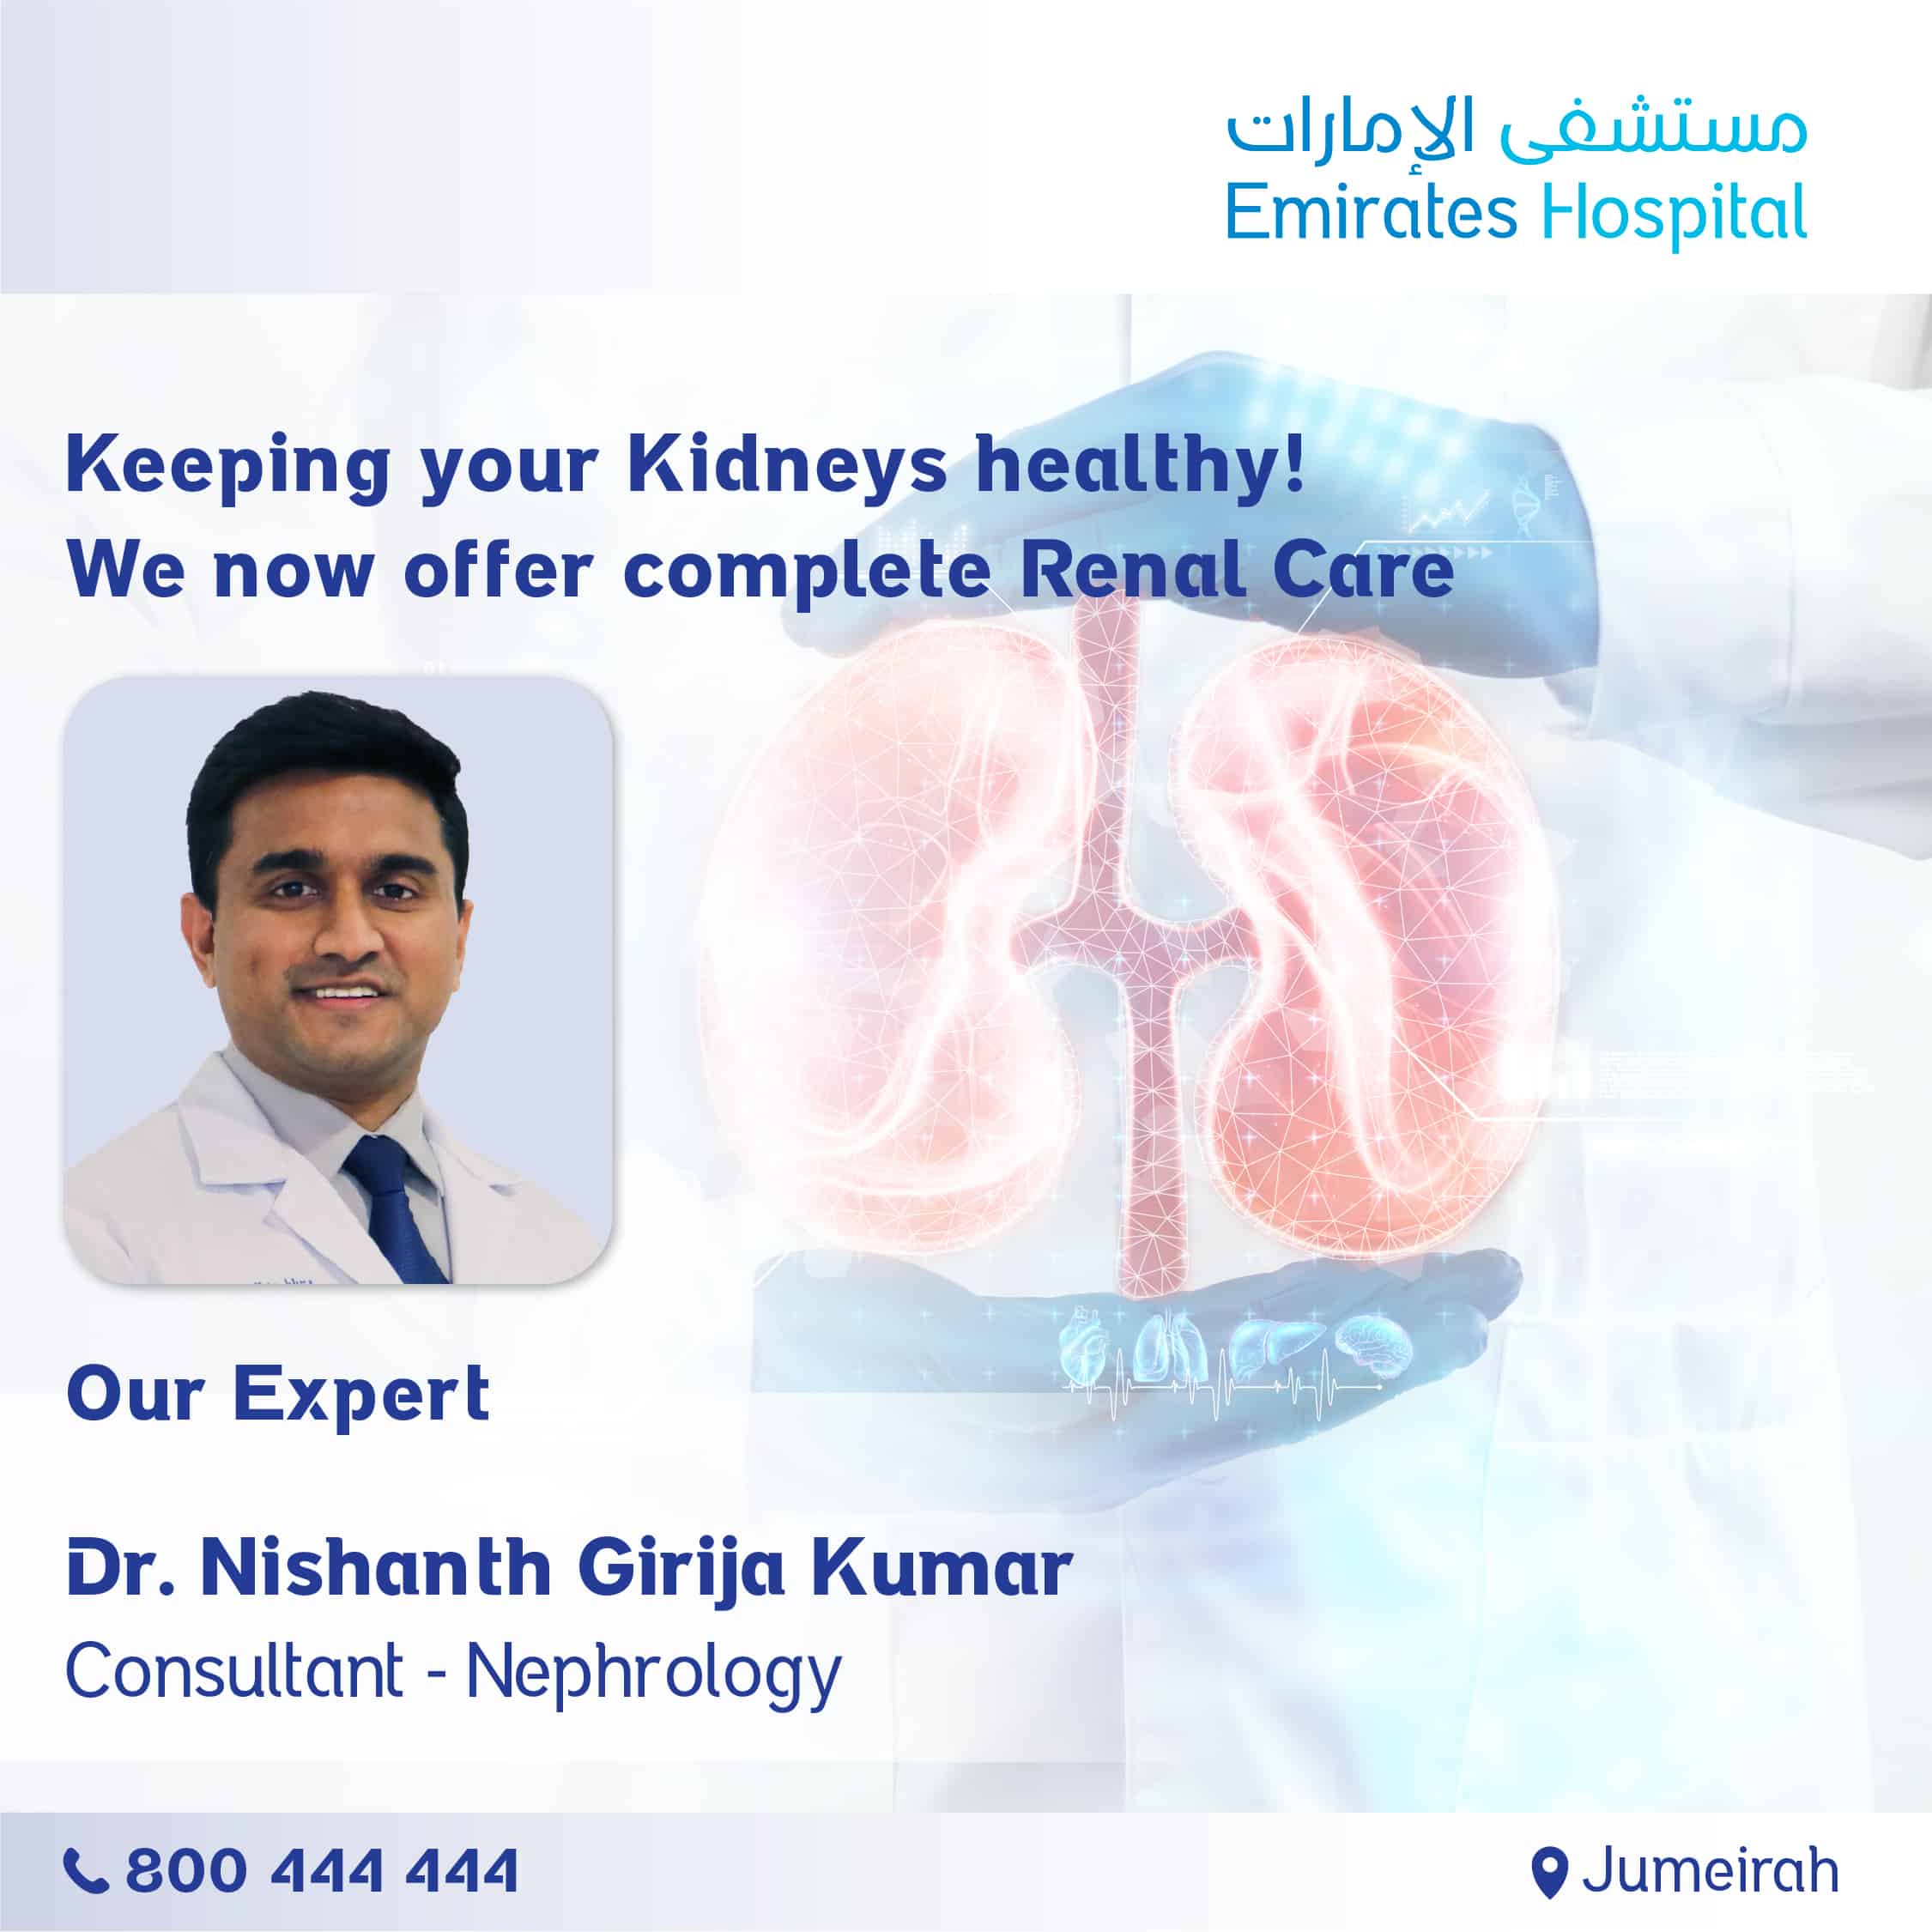 Kidney Health and Renal Care - Nephrology